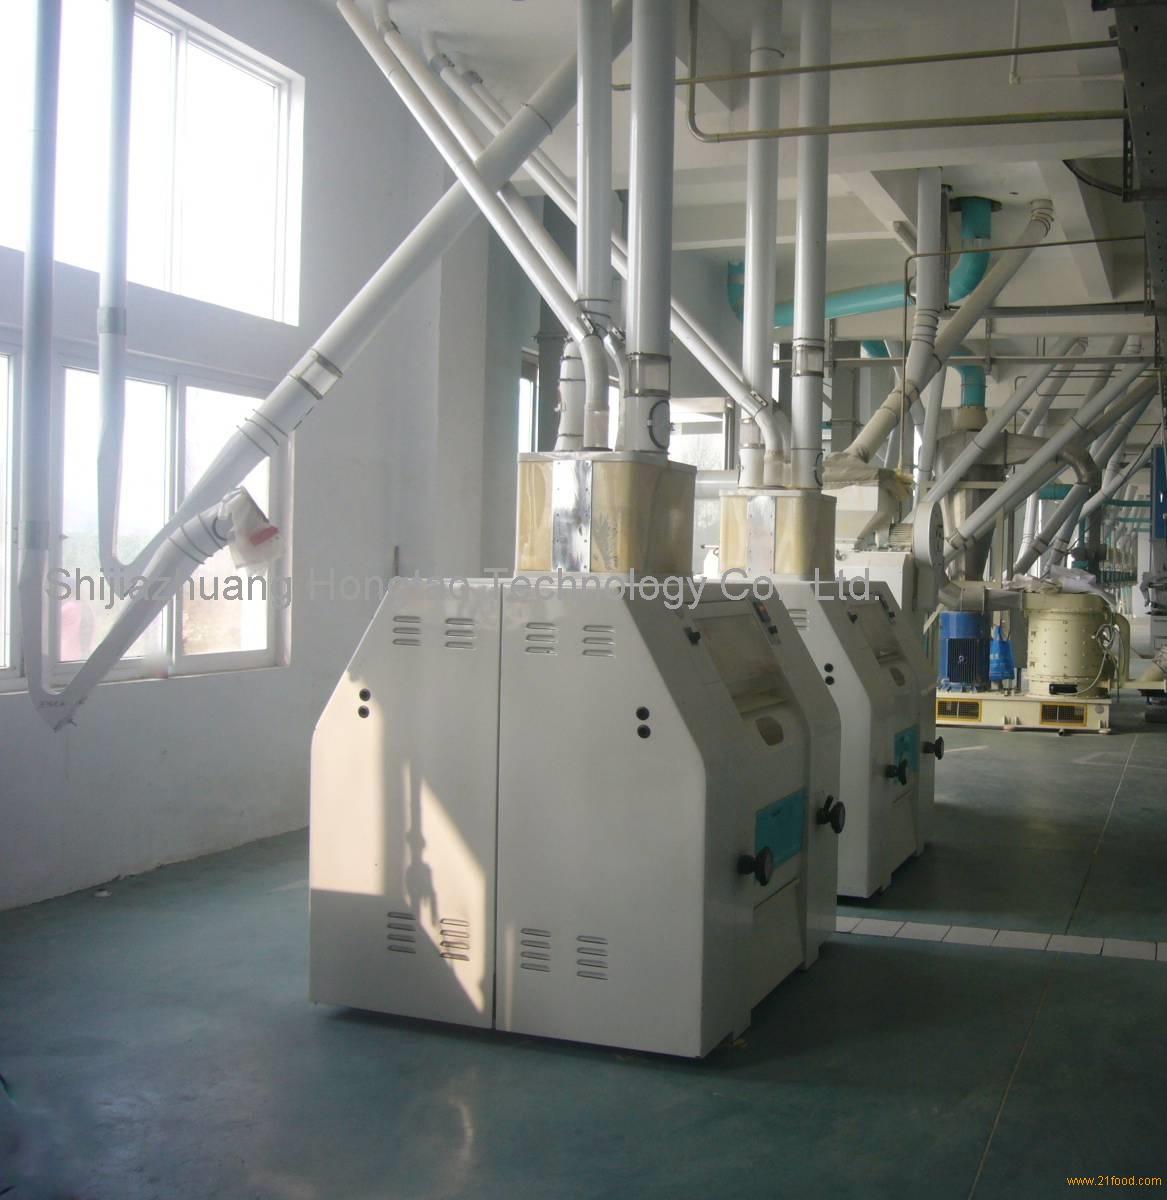 The production line of corn grain processing